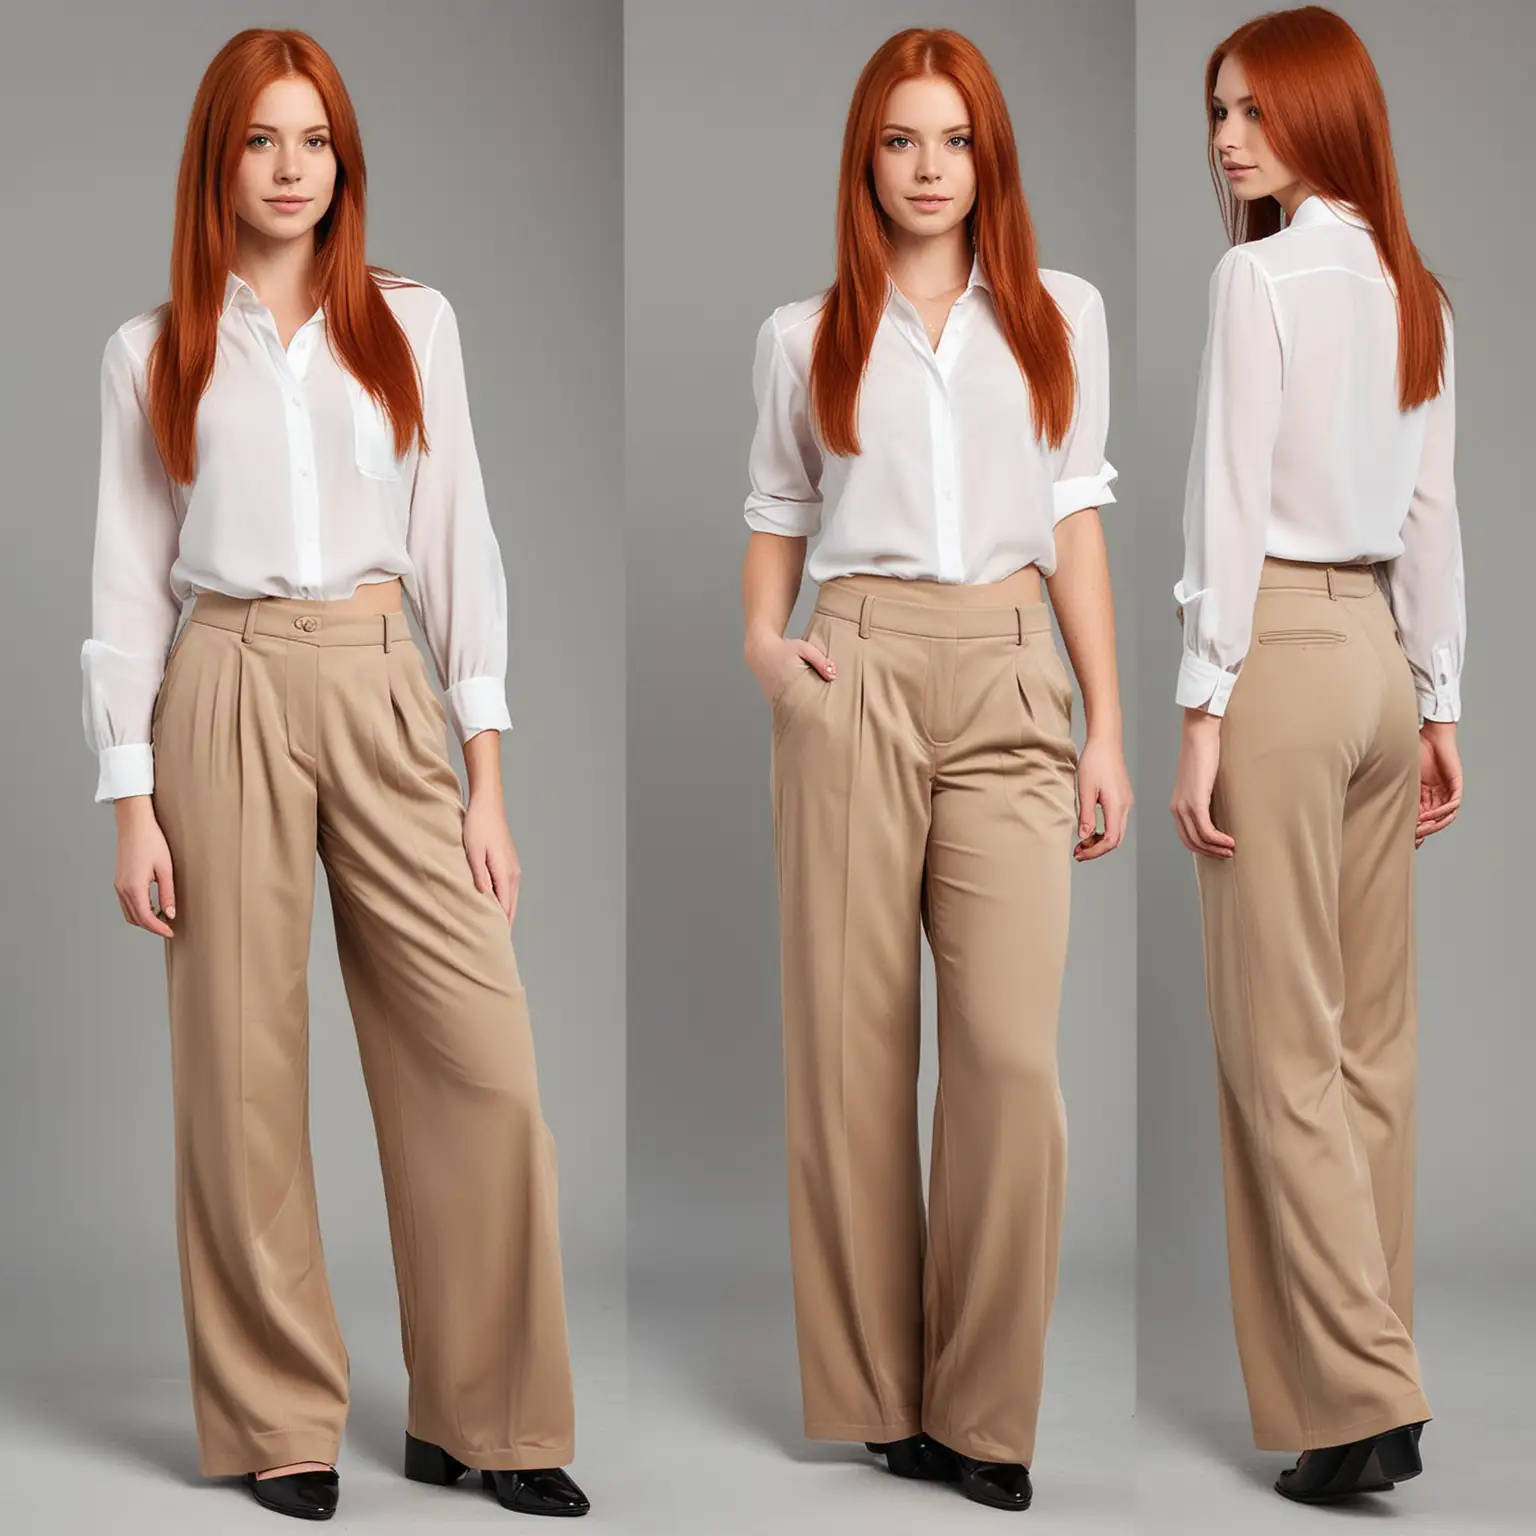 straight red hair teenage girl with blouse and wide leg pants for a job interview. should look like a teen girl full body outfit with flats for shoes. 
